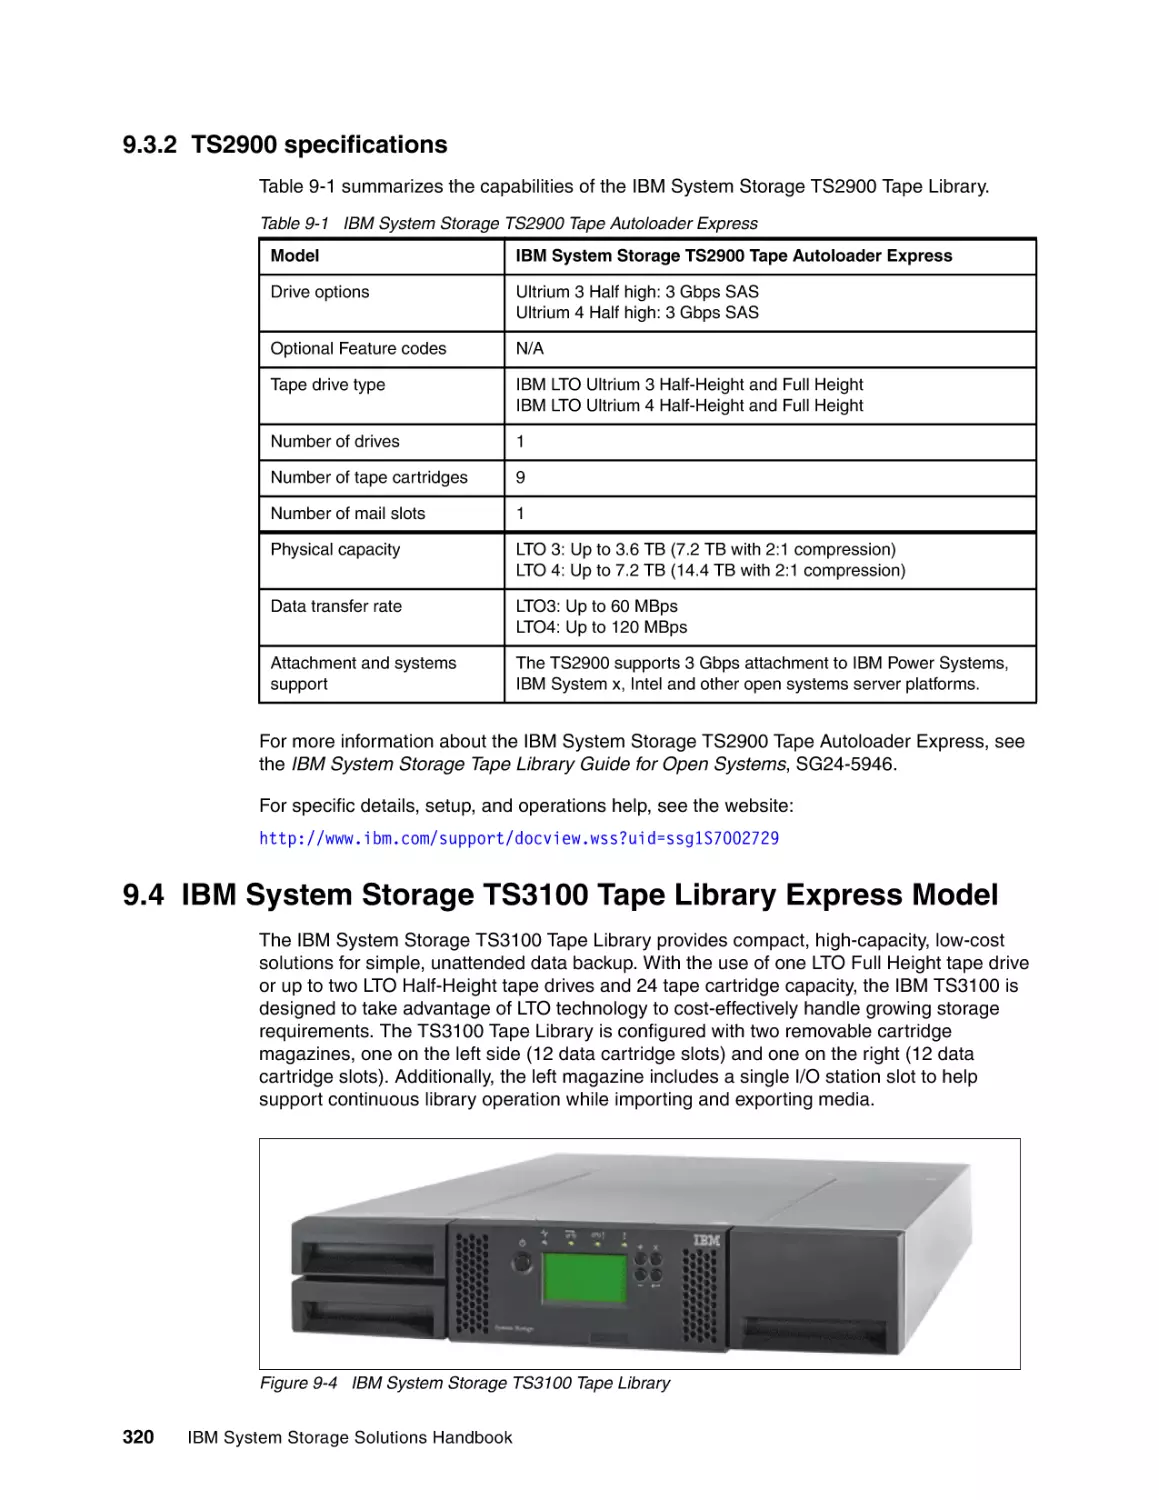 9.3.2 TS2900 specifications
9.4 IBM System Storage TS3100 Tape Library Express Model